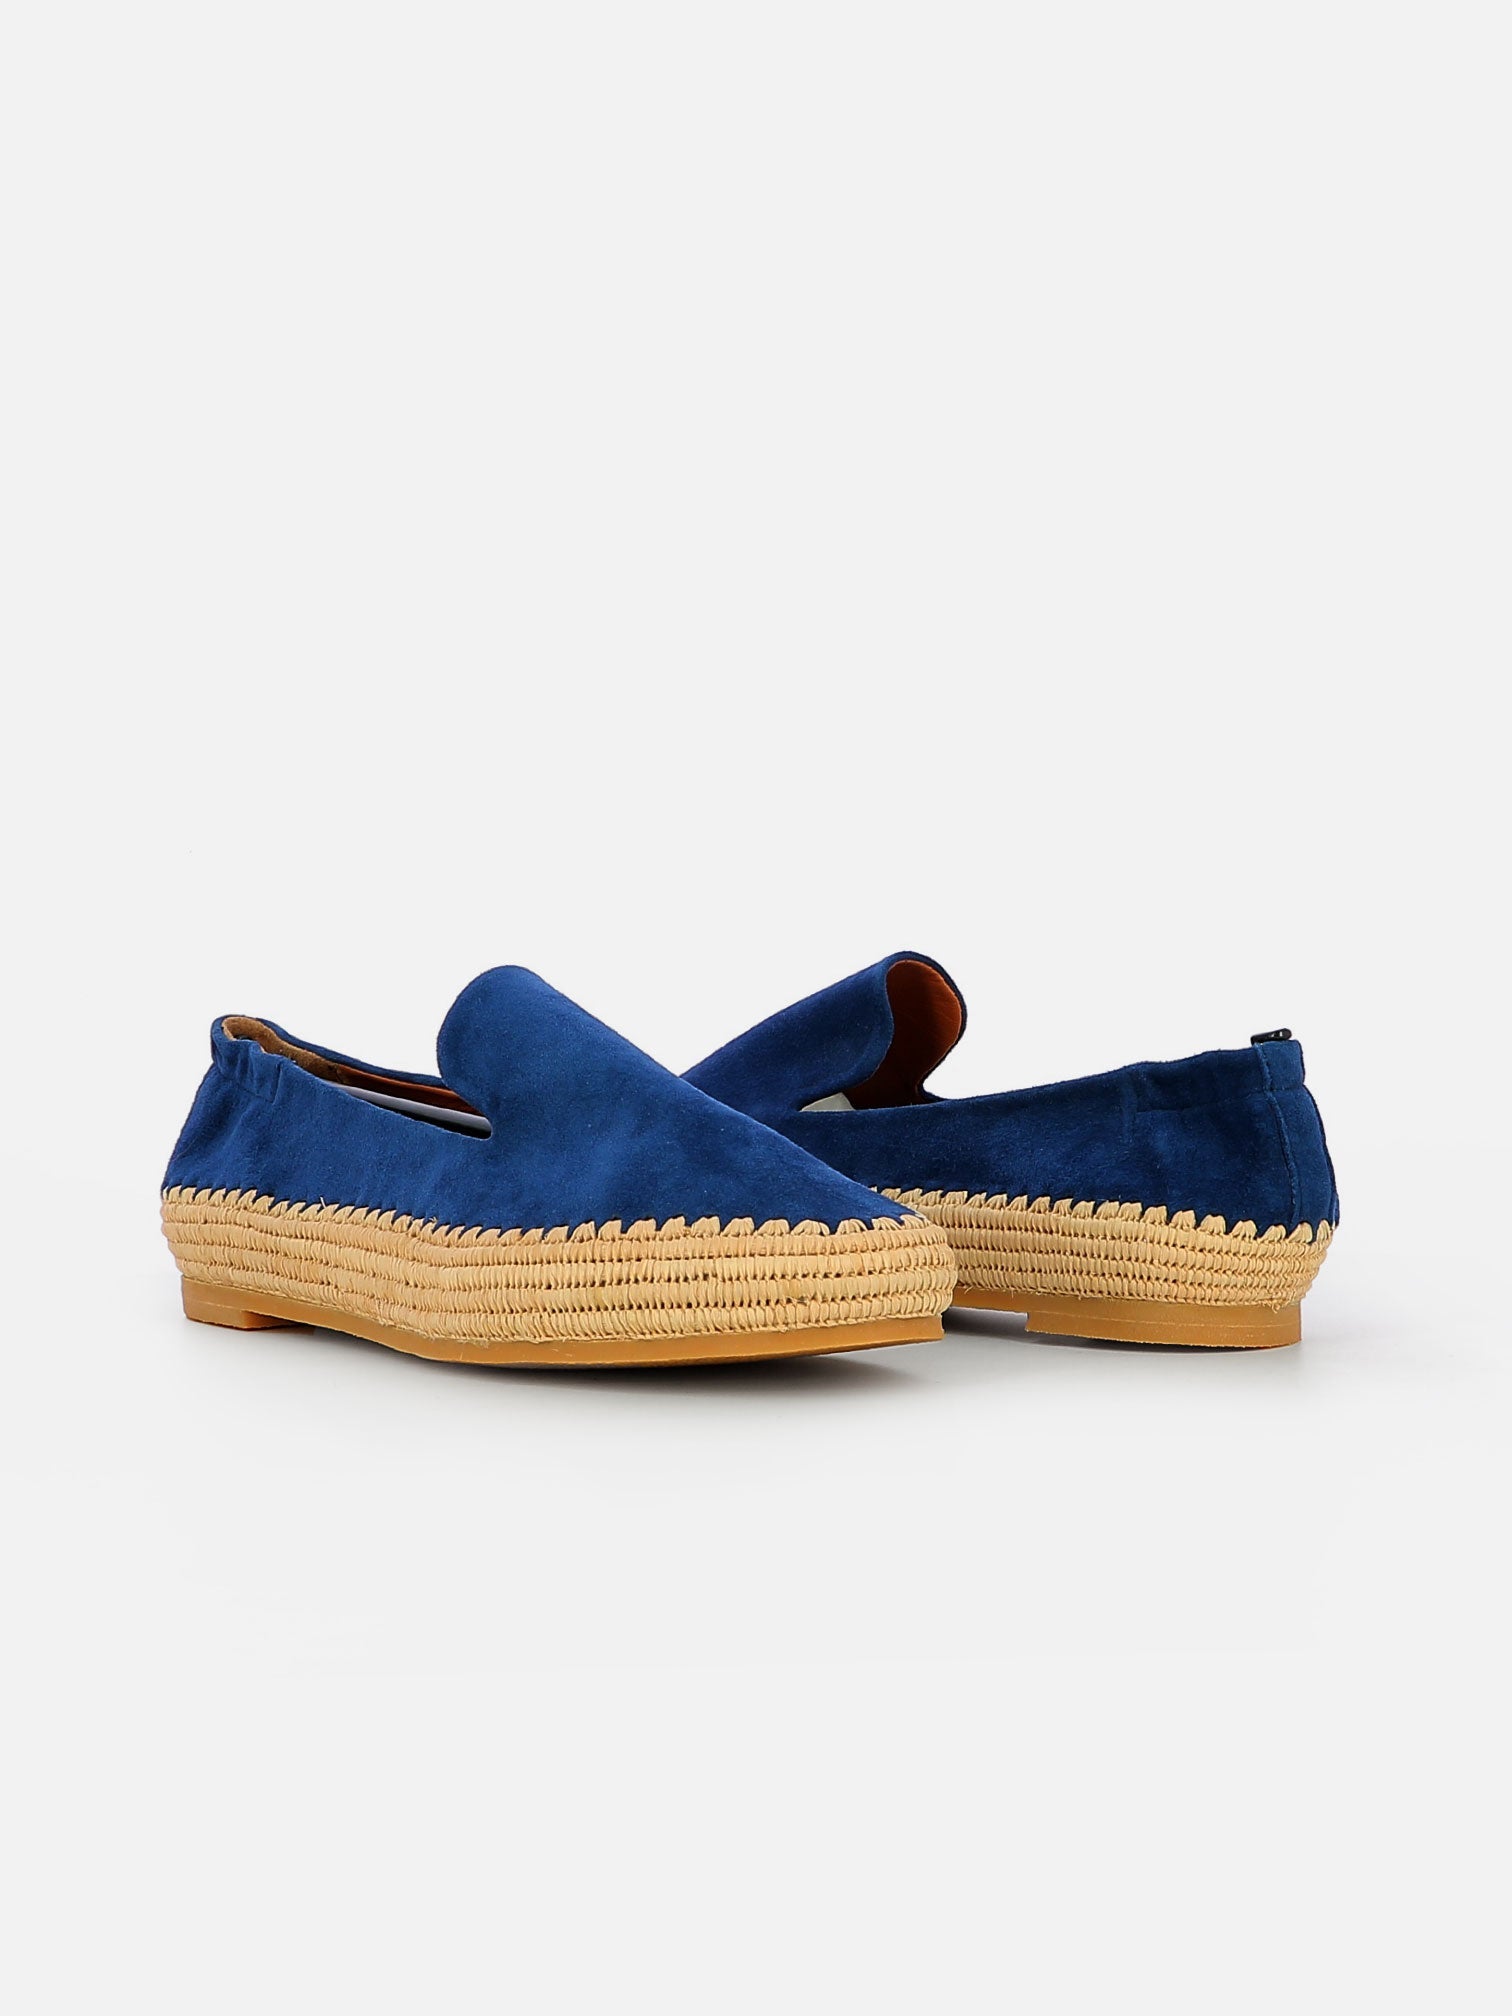 LOAFERS - IRMIS loafers, blue pacific &amp; natural Straw - 3606063528825 - Clergerie Paris - Europe